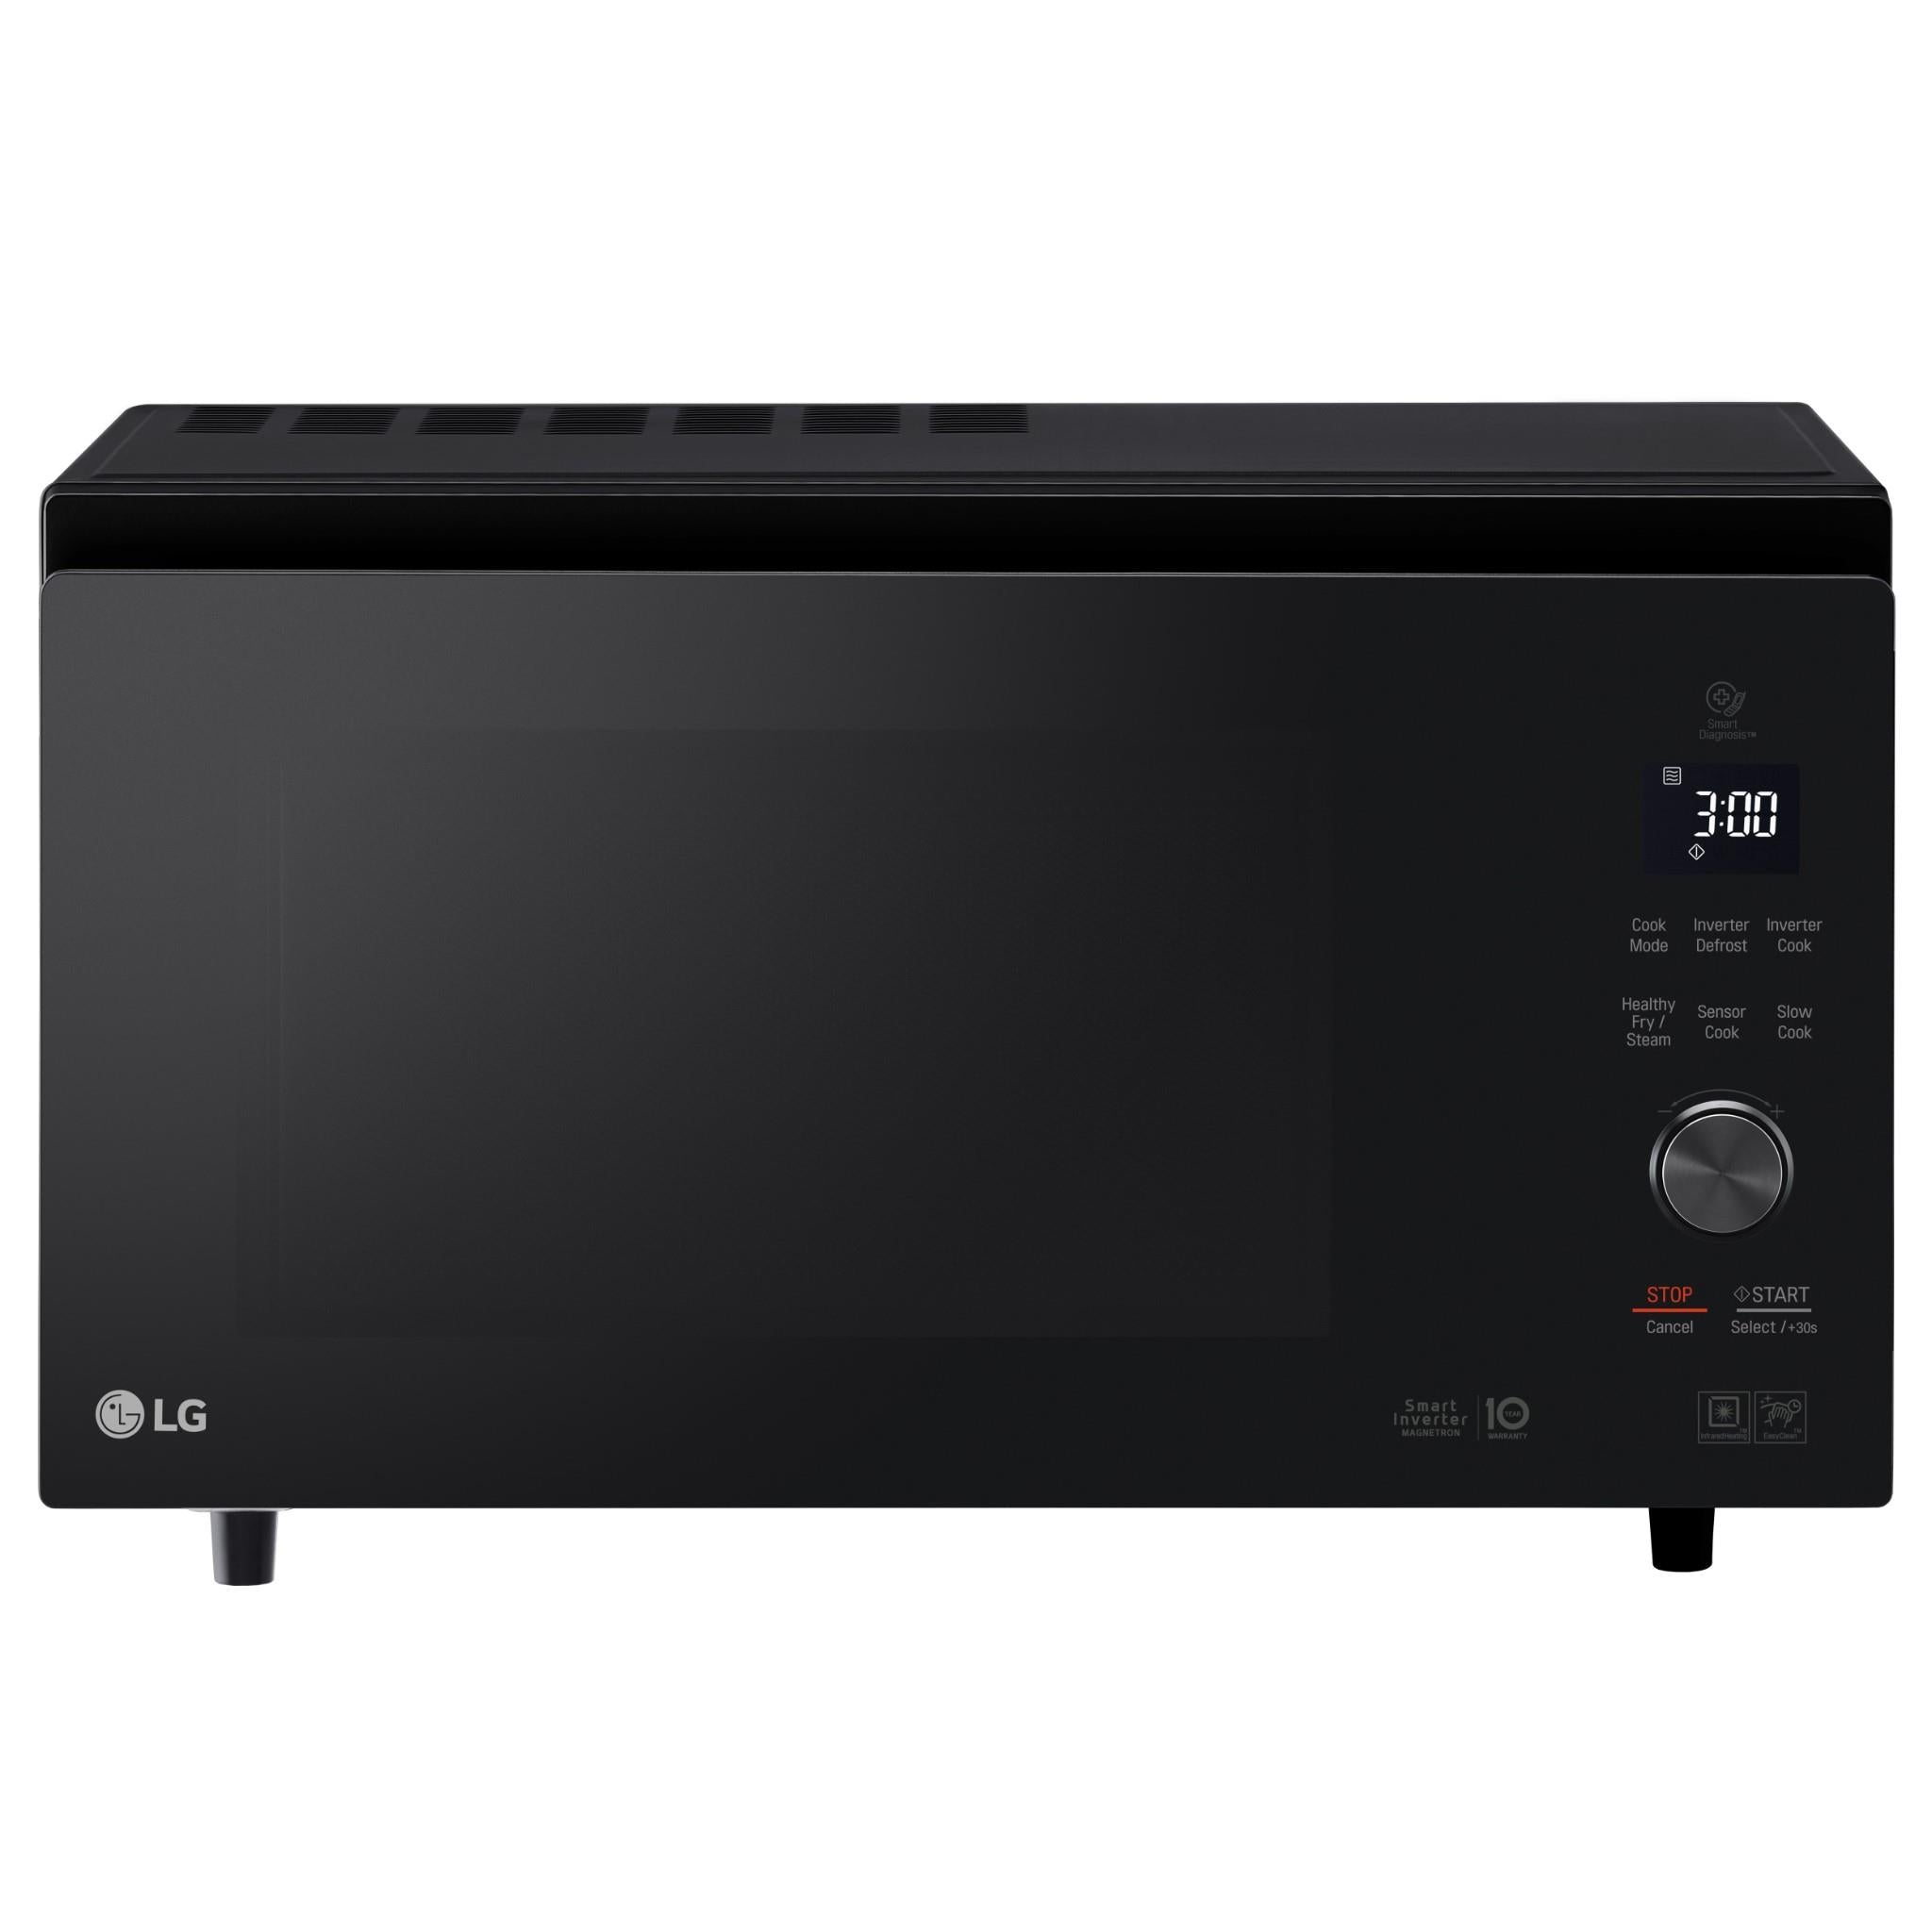 lg neochef mj3966abs 39l smart inverter microwave with sensor cook